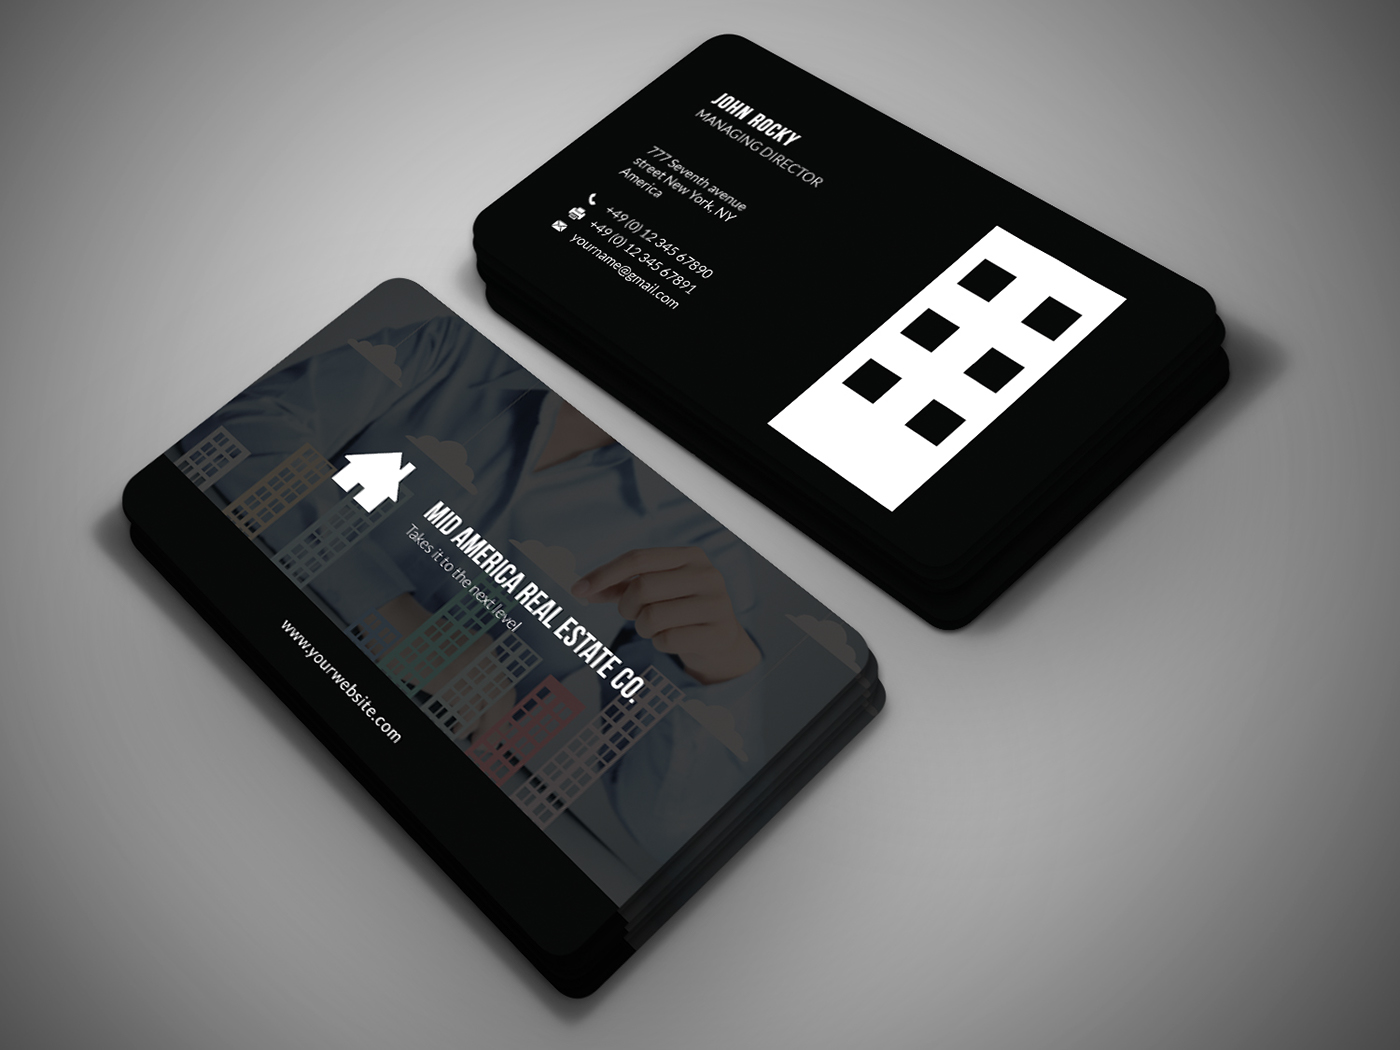 Google Search Business Card Template